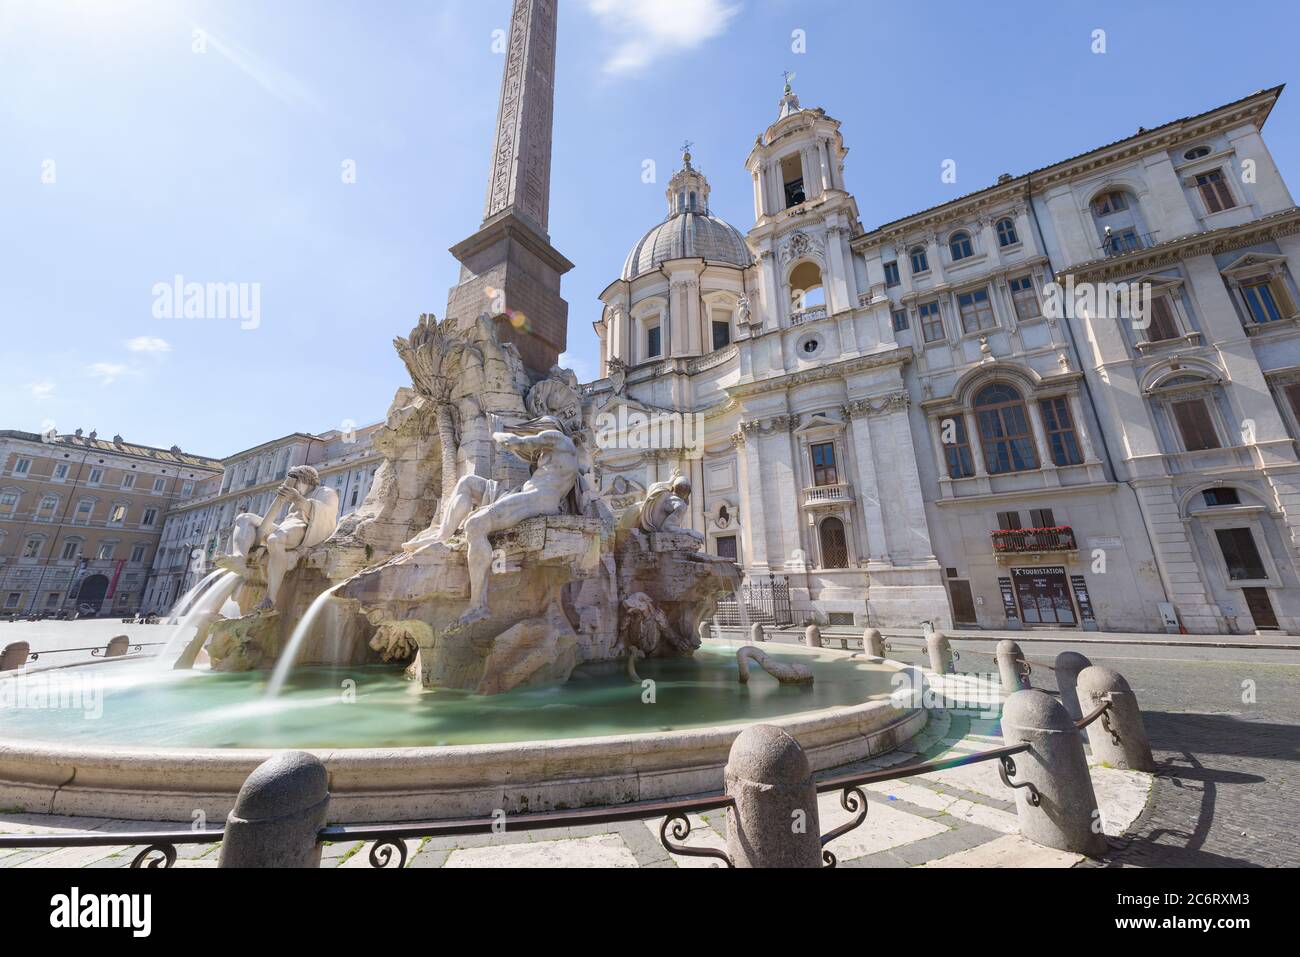 Rome, Italy -12 Mar 2020: Popular tourist spot Piazza Navona is empty following the coronavirus confinement measures put in place by the governement, Stock Photo